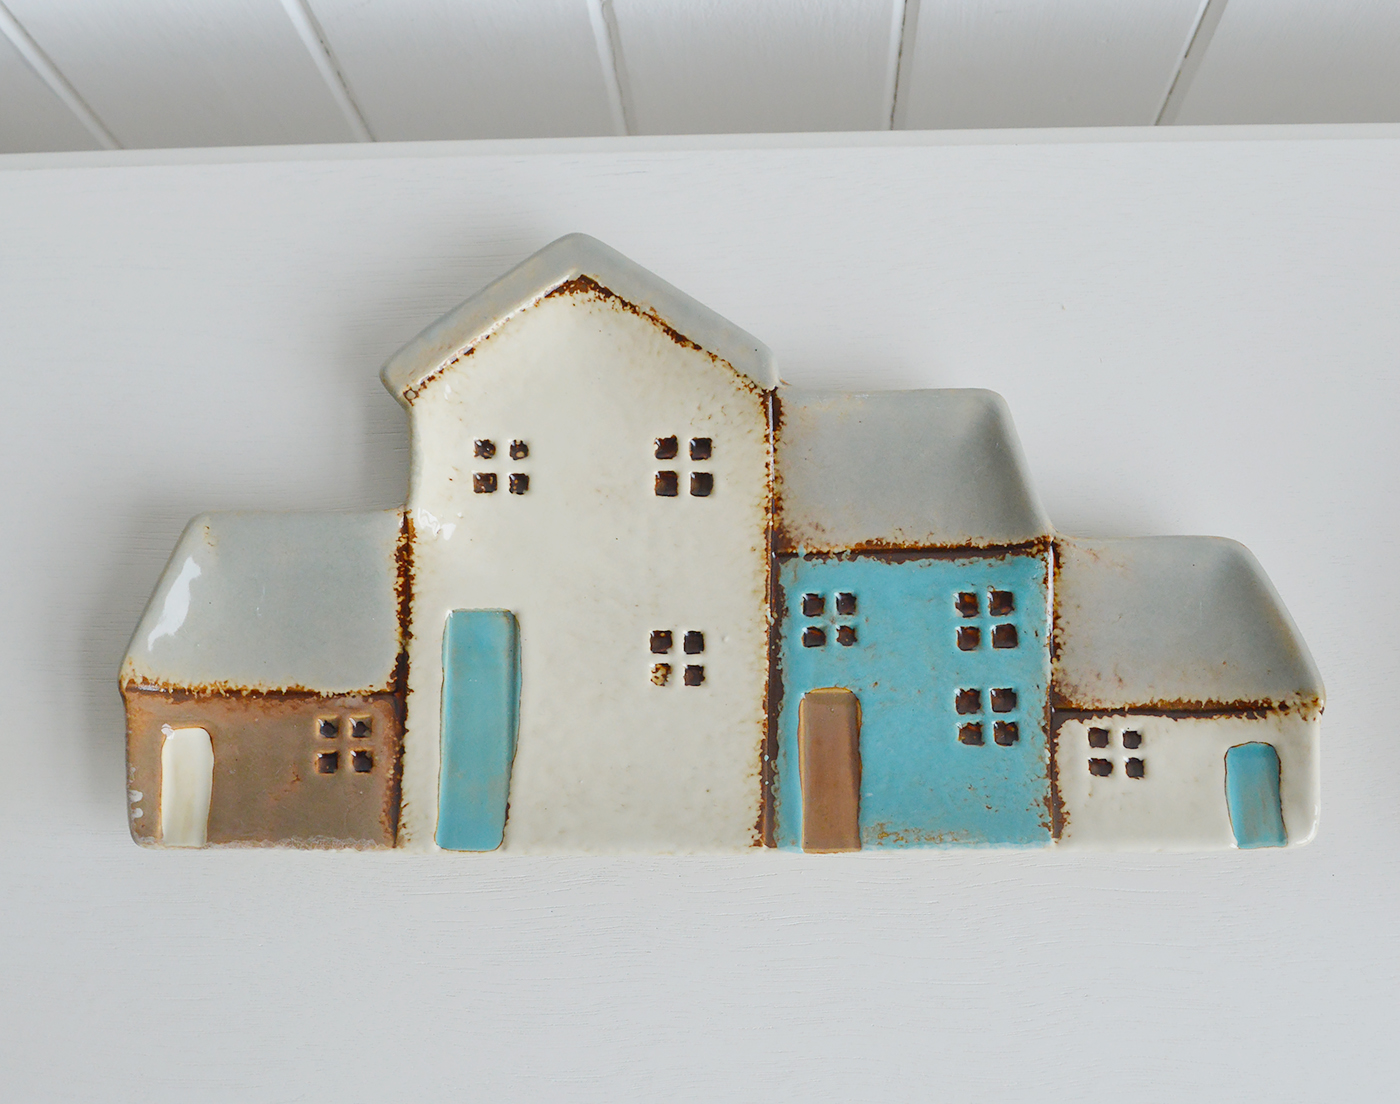 Decorative ceramic plates, beach hut and cottages from The White Lighthouse coastal, New England and country , farmhouse furniture and home decor accessories UK